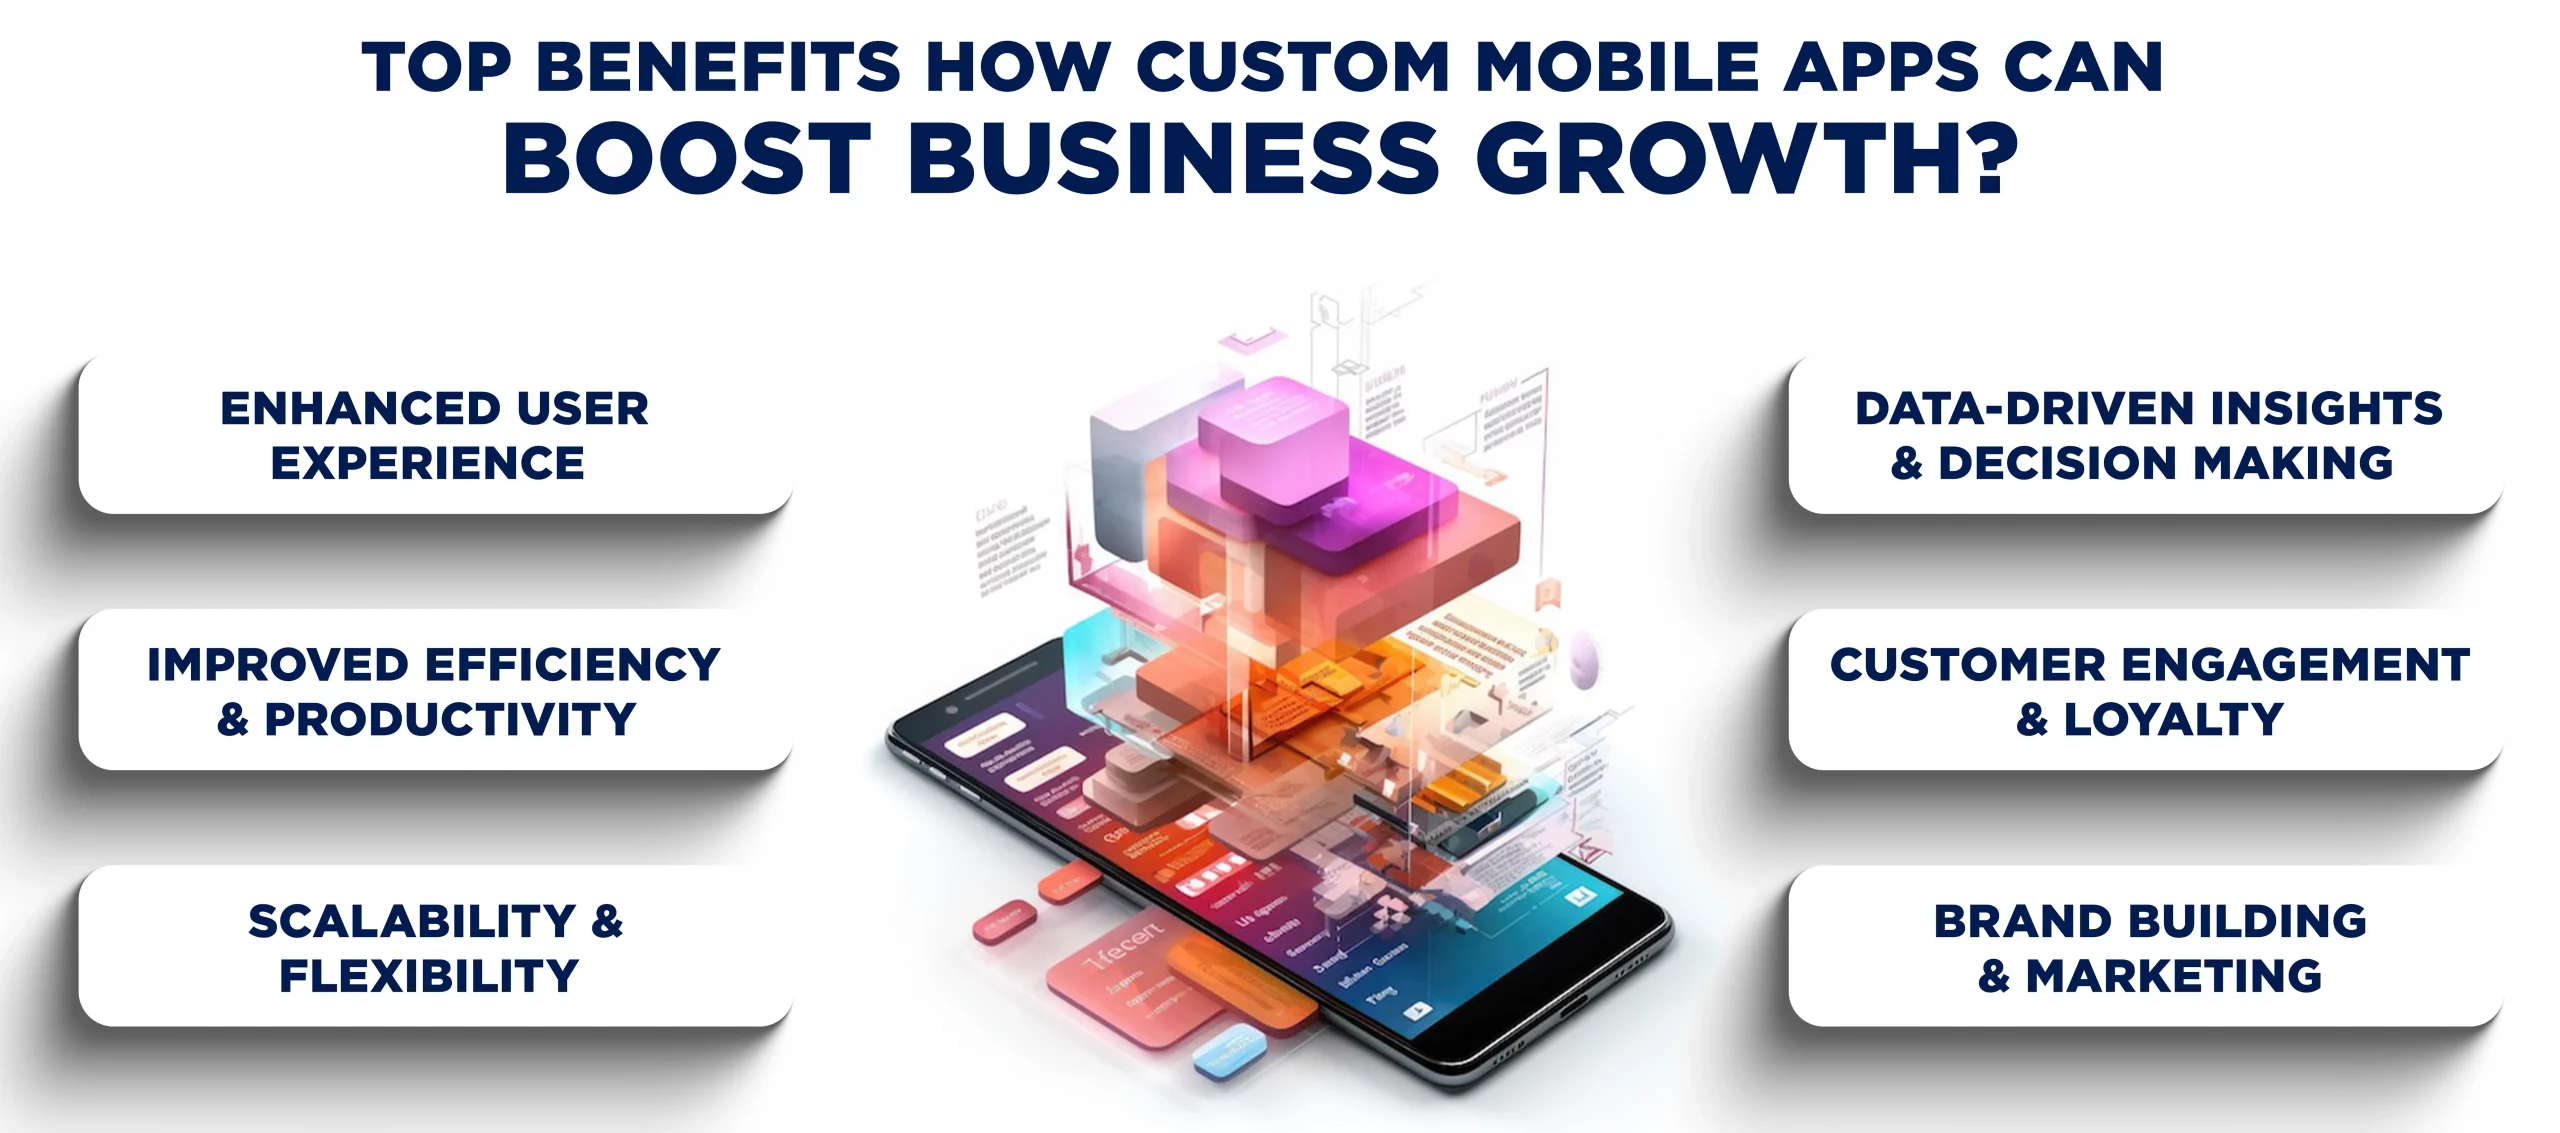 Top Benefits How Custom Mobile Apps Can